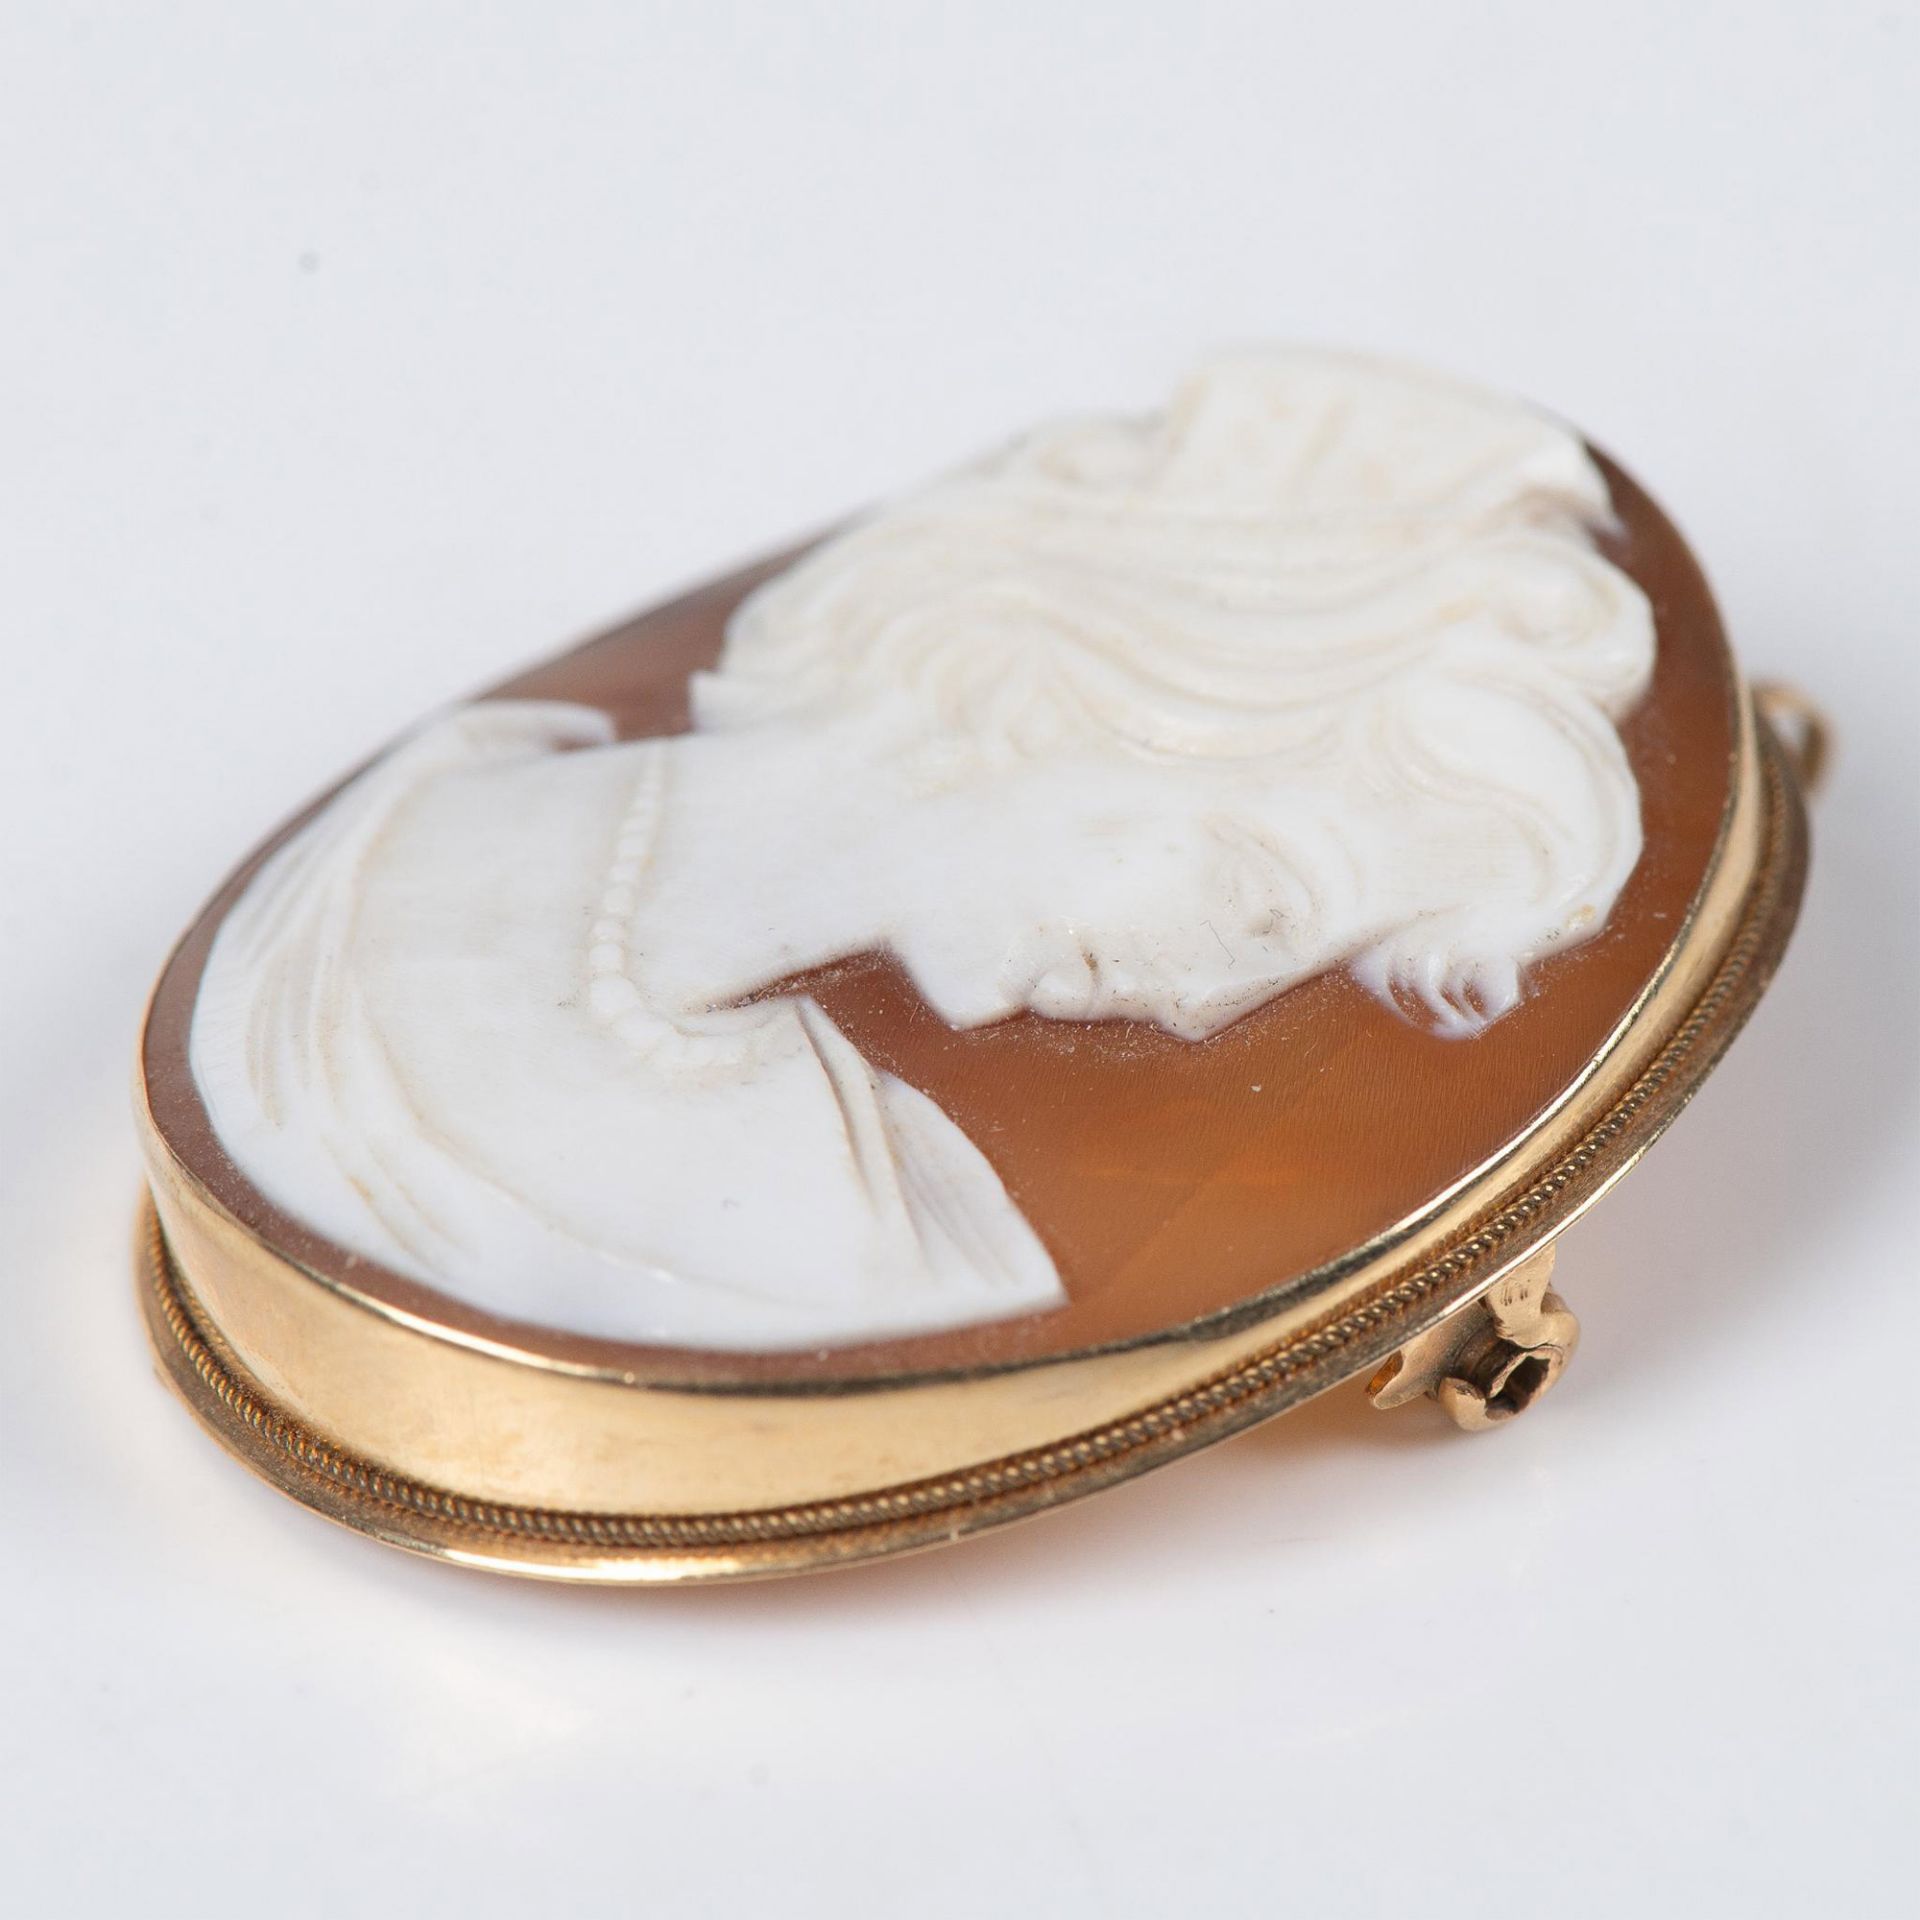 14k Gold Carved Shell Cameo Pendant-Brooch - Image 3 of 3